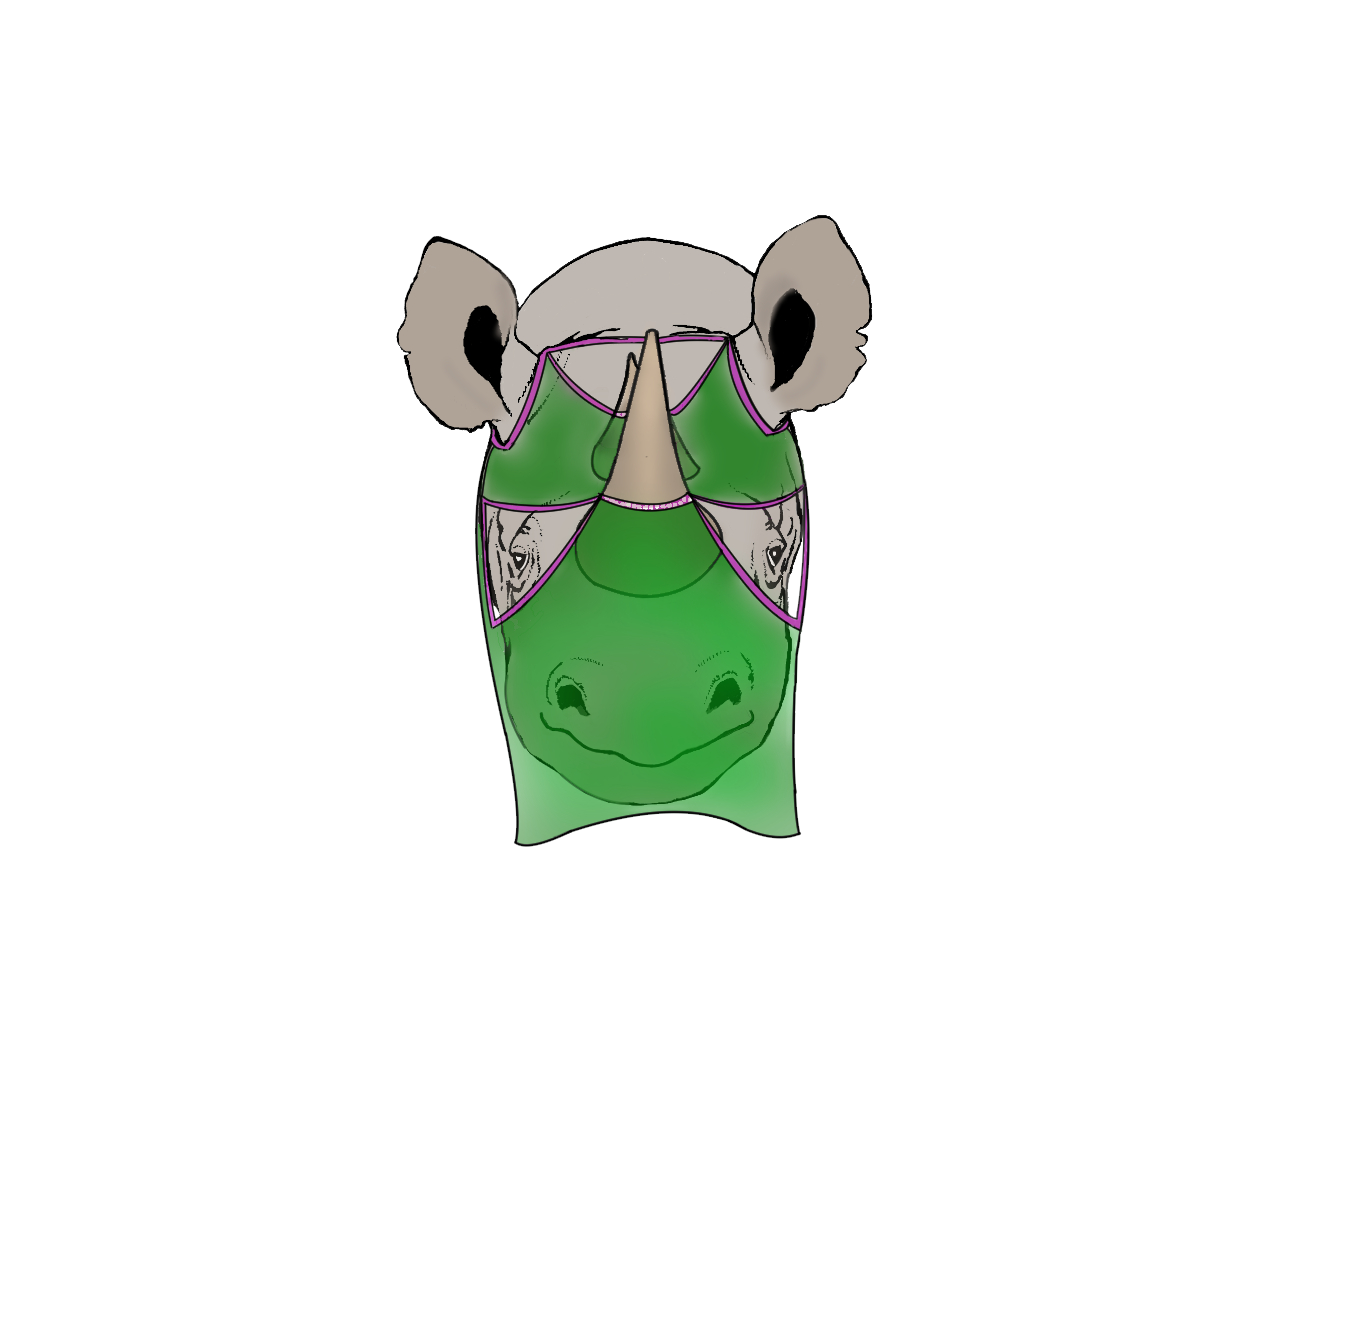 white rhino wife front view with green veil online marketing strategy #4